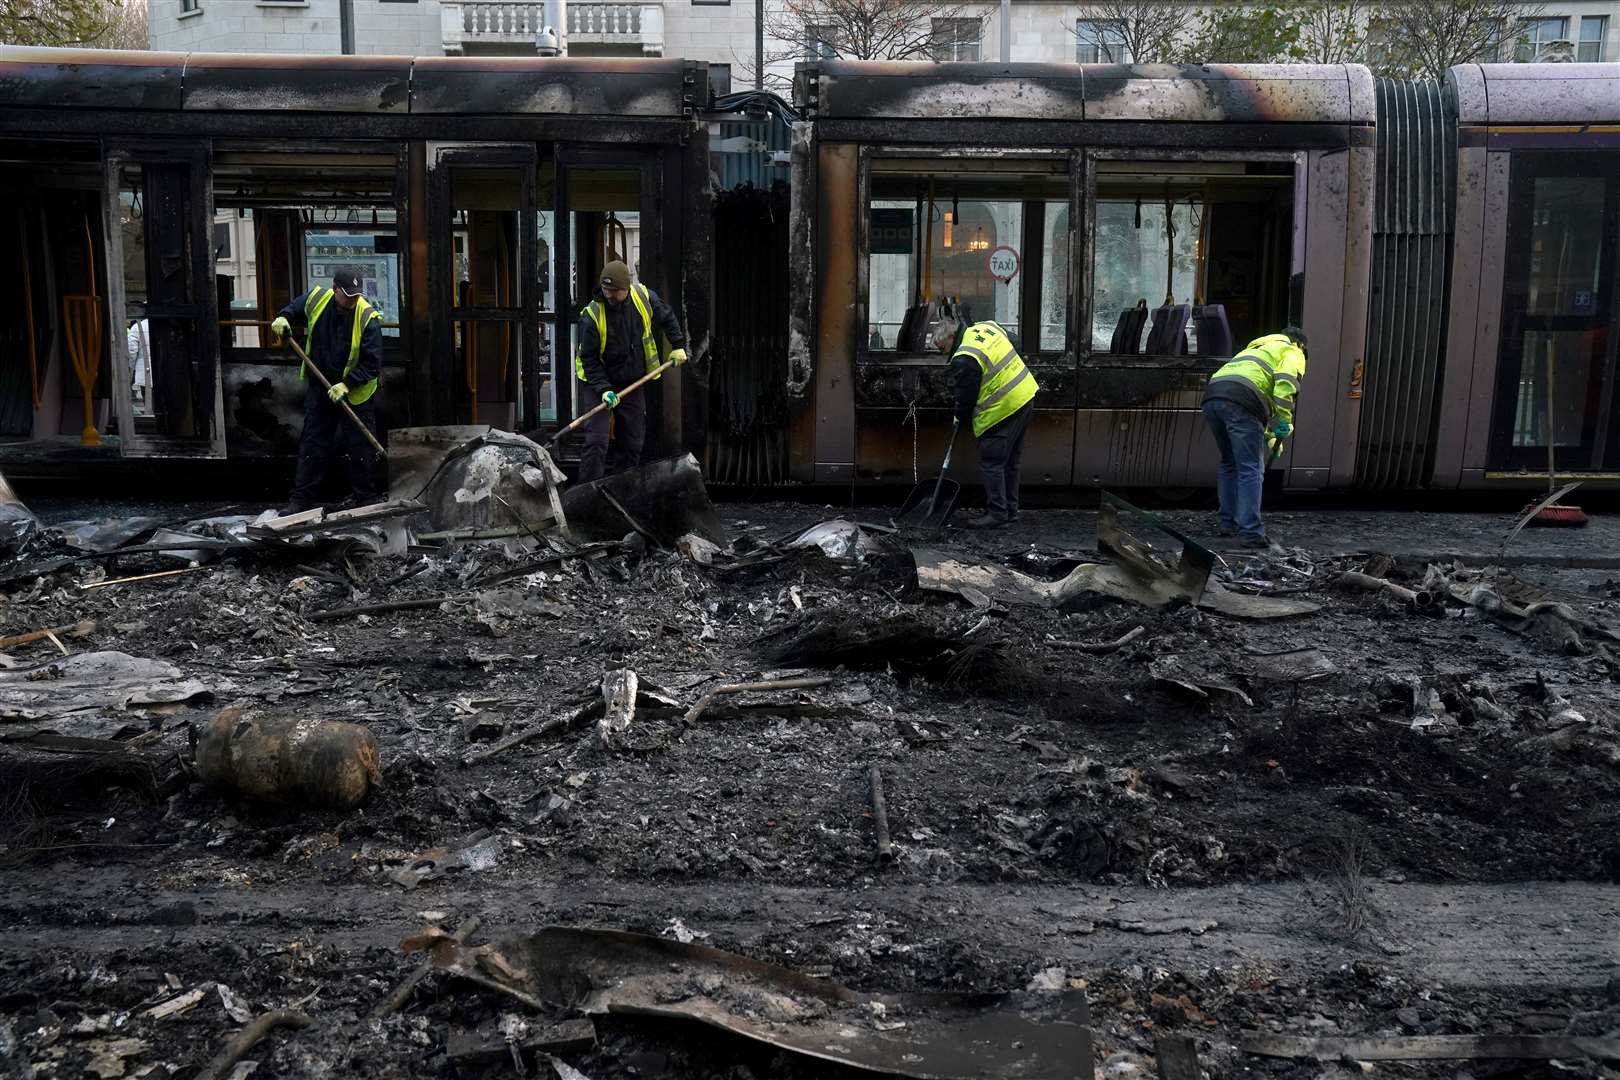 Debris is cleared from a burned out Luas and bus on O’Connell Street in Dublin (Brian Lawless/PA)